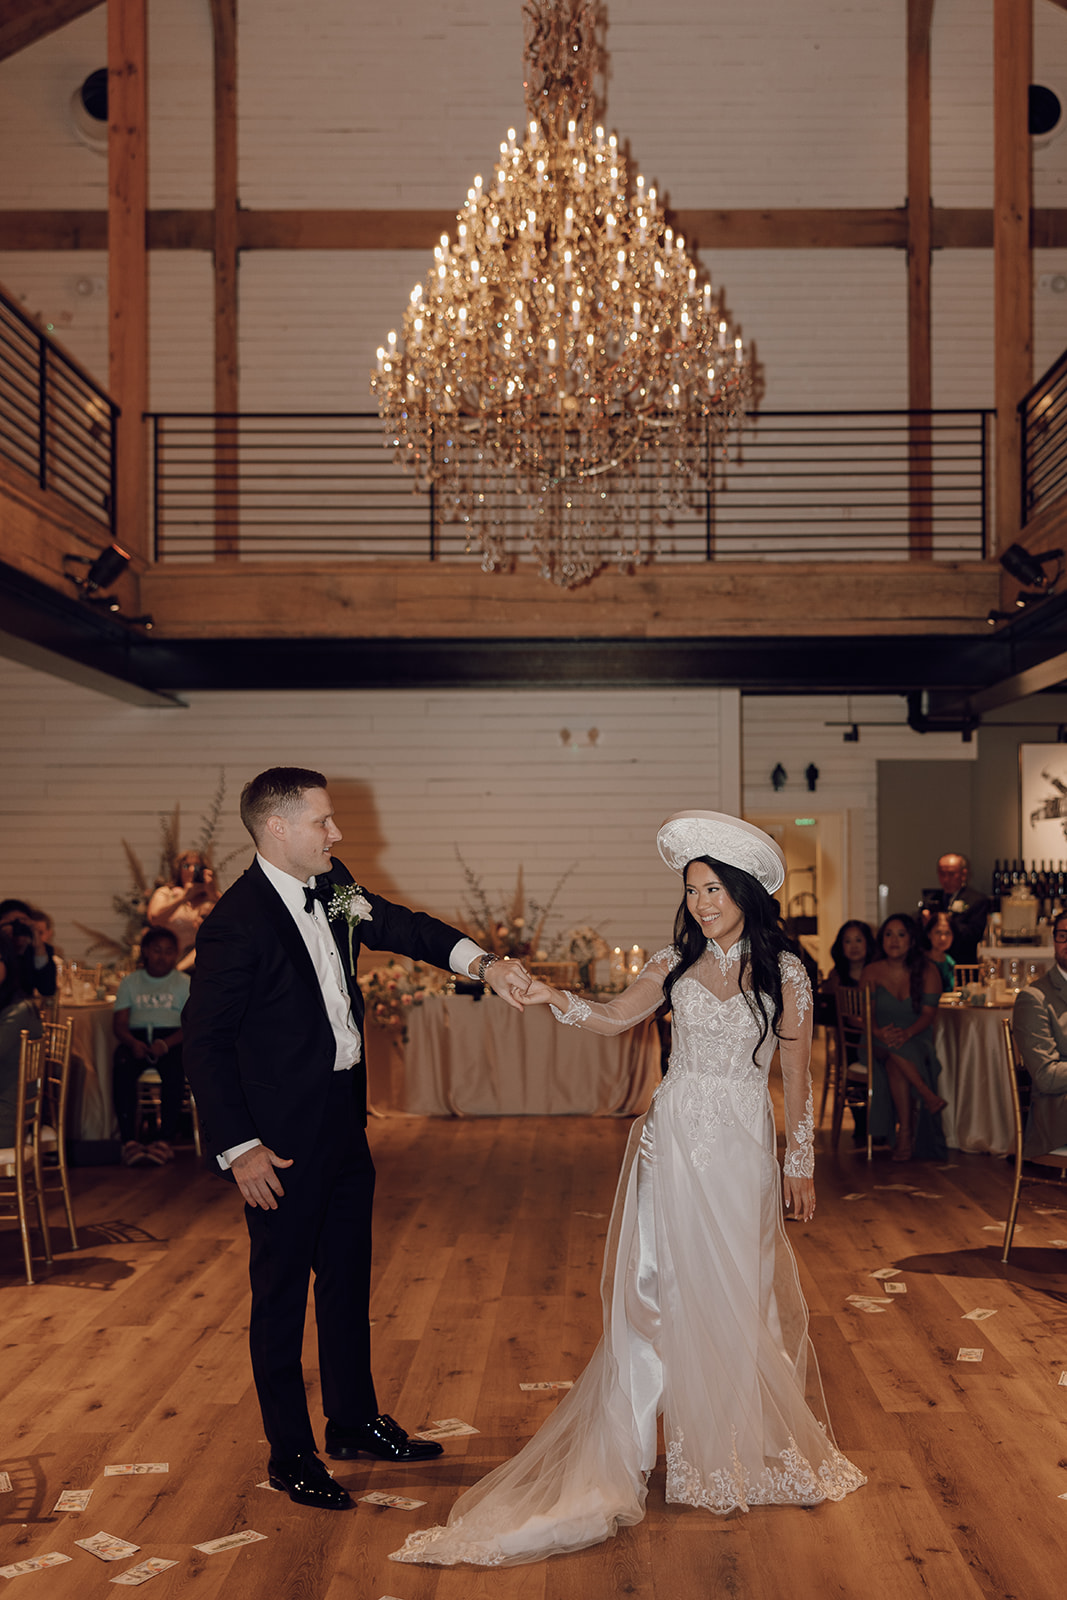 the couple dancing under the chandelier captured by the destination wedding photographer